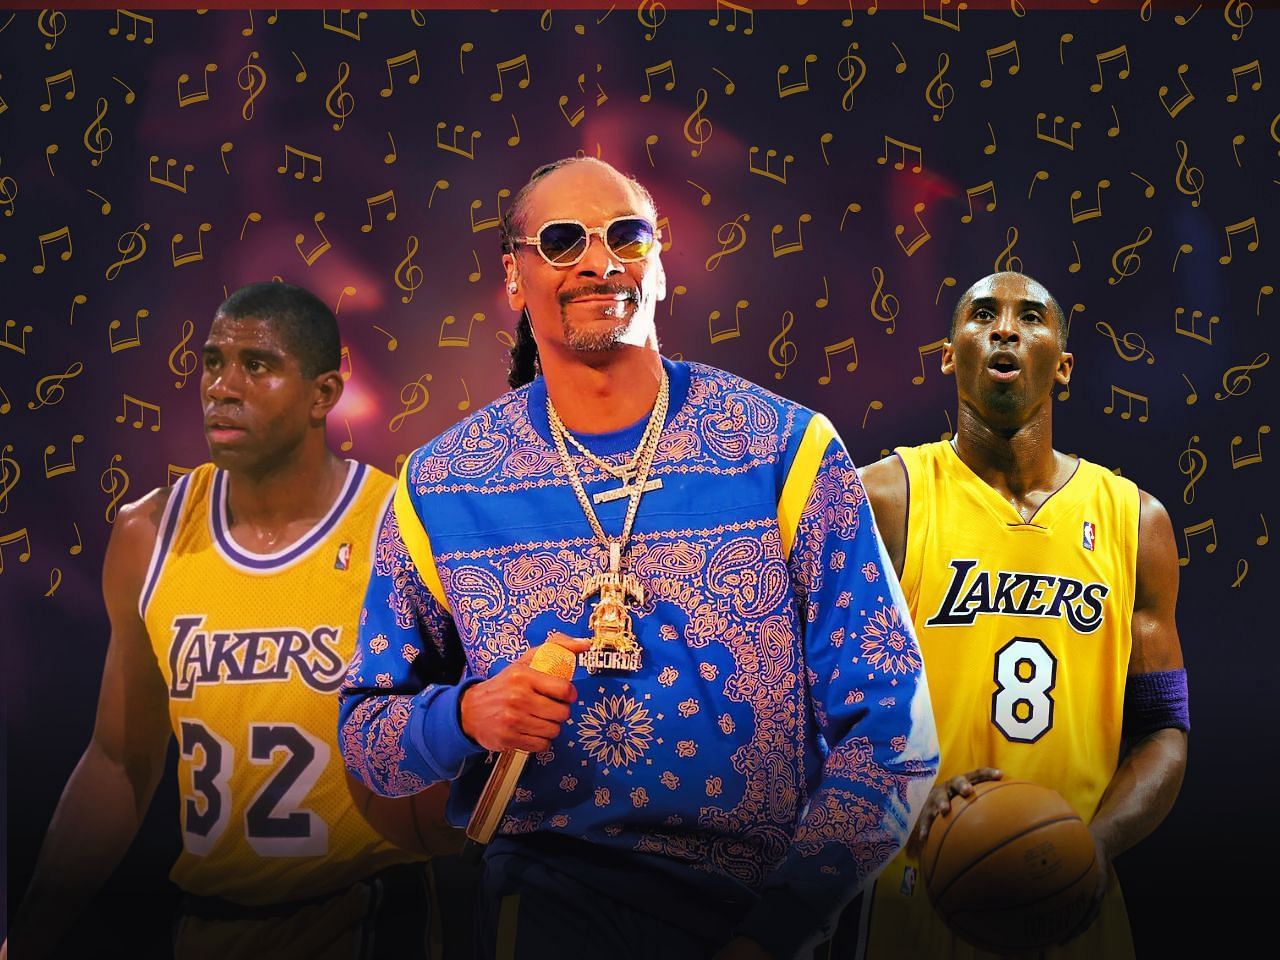 Snoop Dogg snubs LeBron James from his top 5 Lakers of all-time